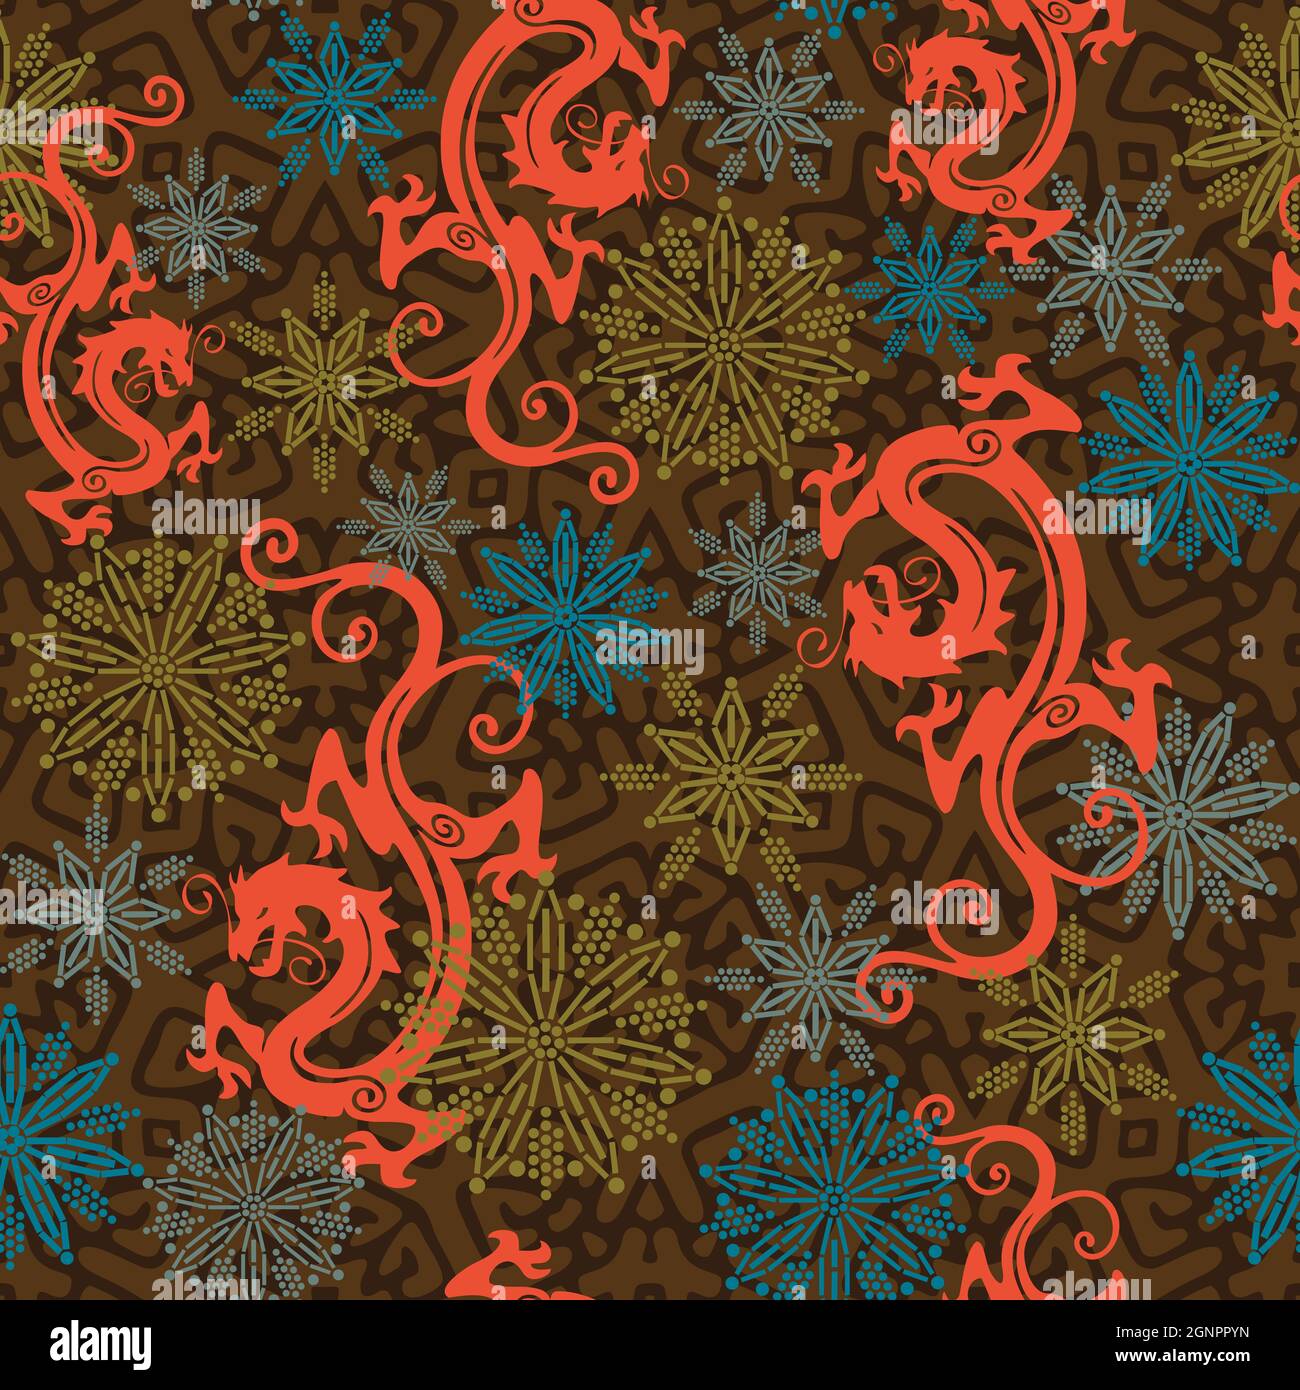 Seamless pattern with Dragons and Ethnic Flowers Stock Photo